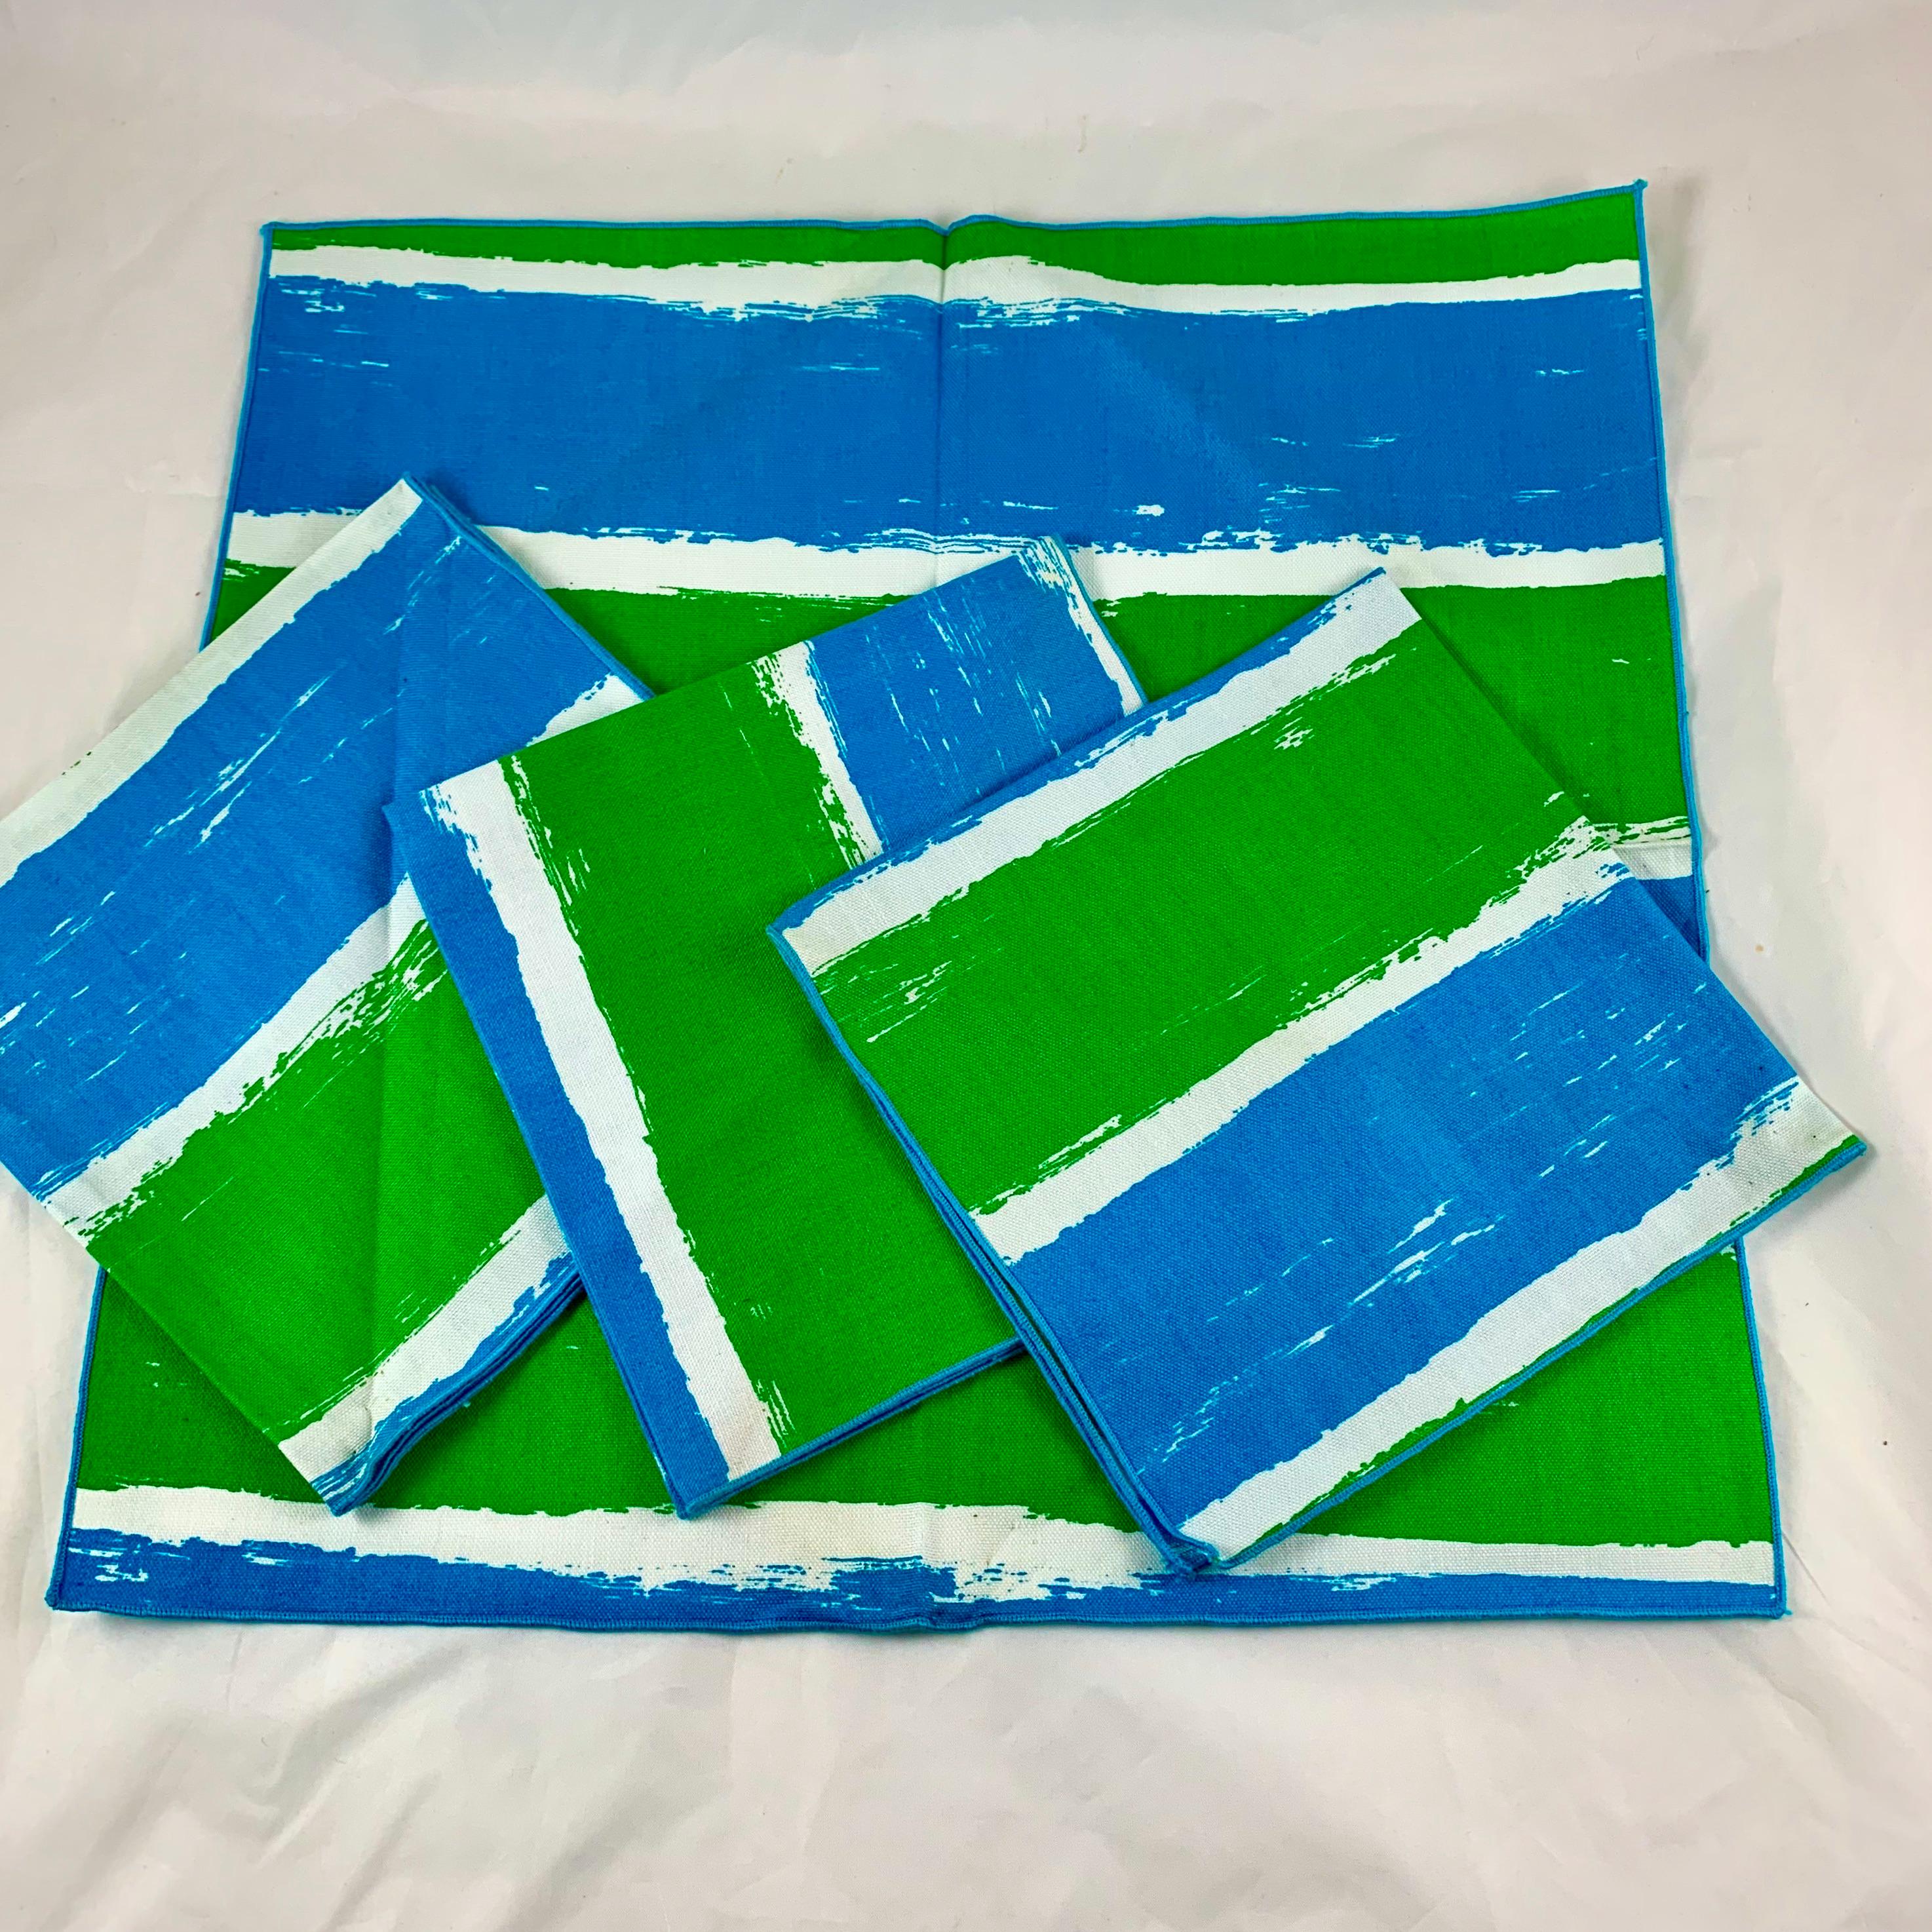 Vera Neumann Mid-Century Modern Era Blue & Green Placemat & Napkin S/4, Tagged In Excellent Condition For Sale In Philadelphia, PA